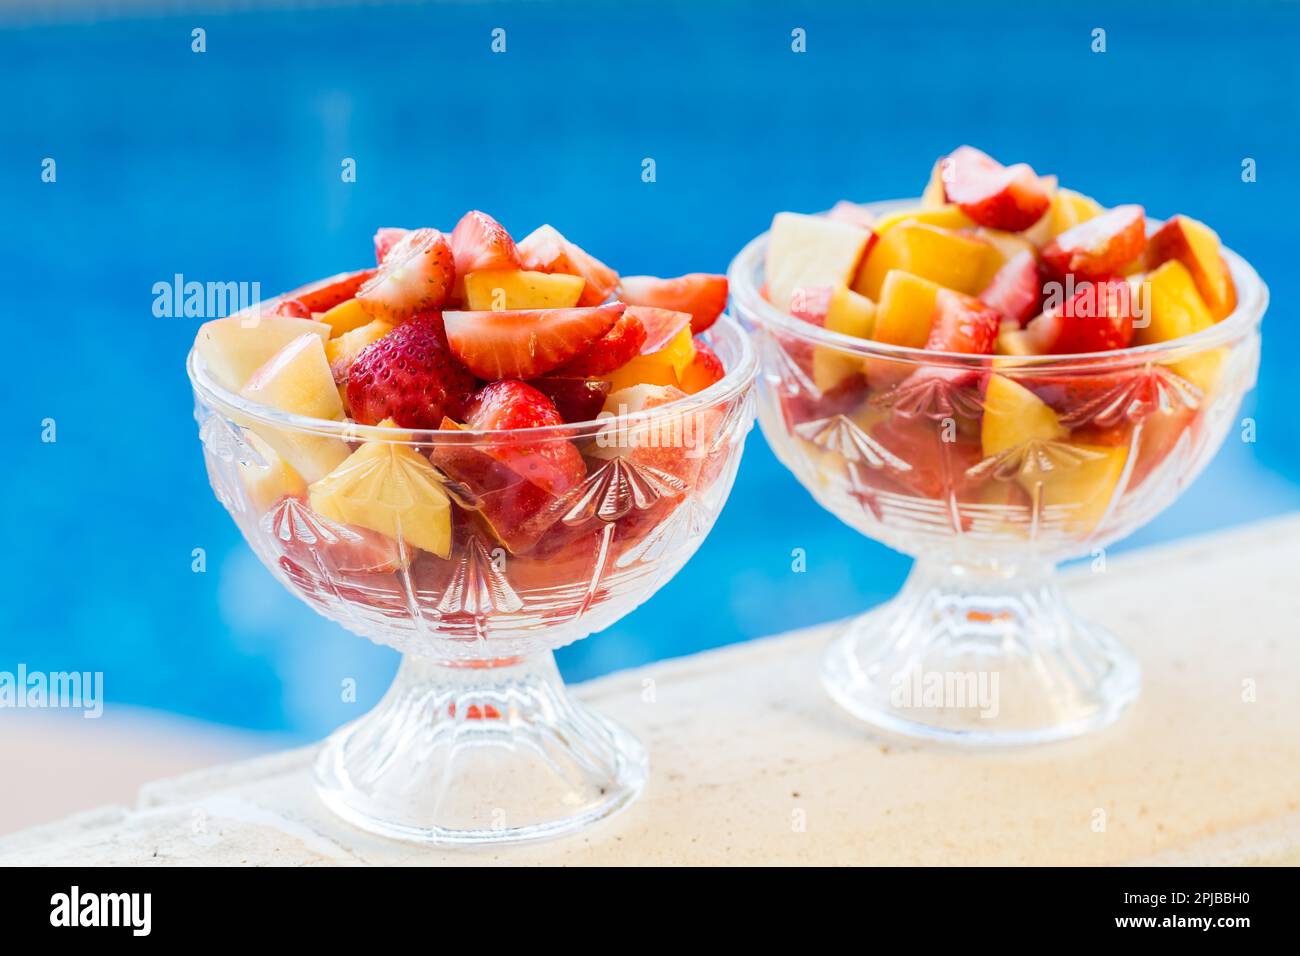 Two bowls of fresh fruit salad with swimming pool in background. Concept of healthy eating, antioxidants and summer time Stock Photo